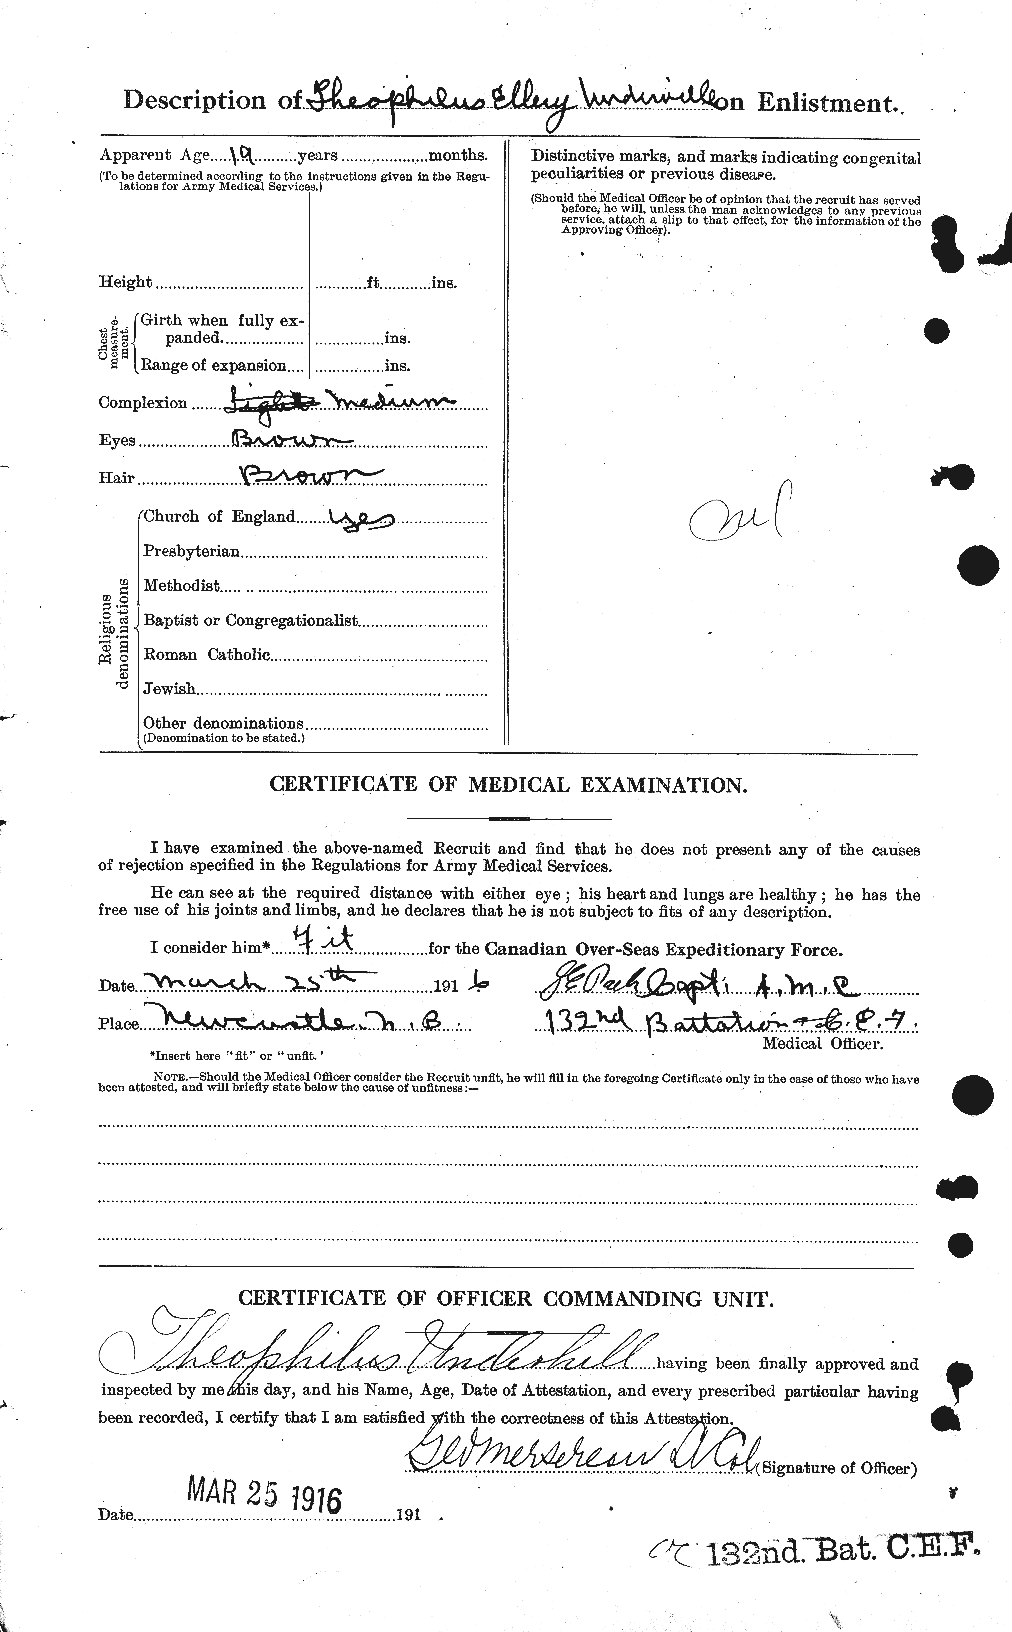 Personnel Records of the First World War - CEF 647116b